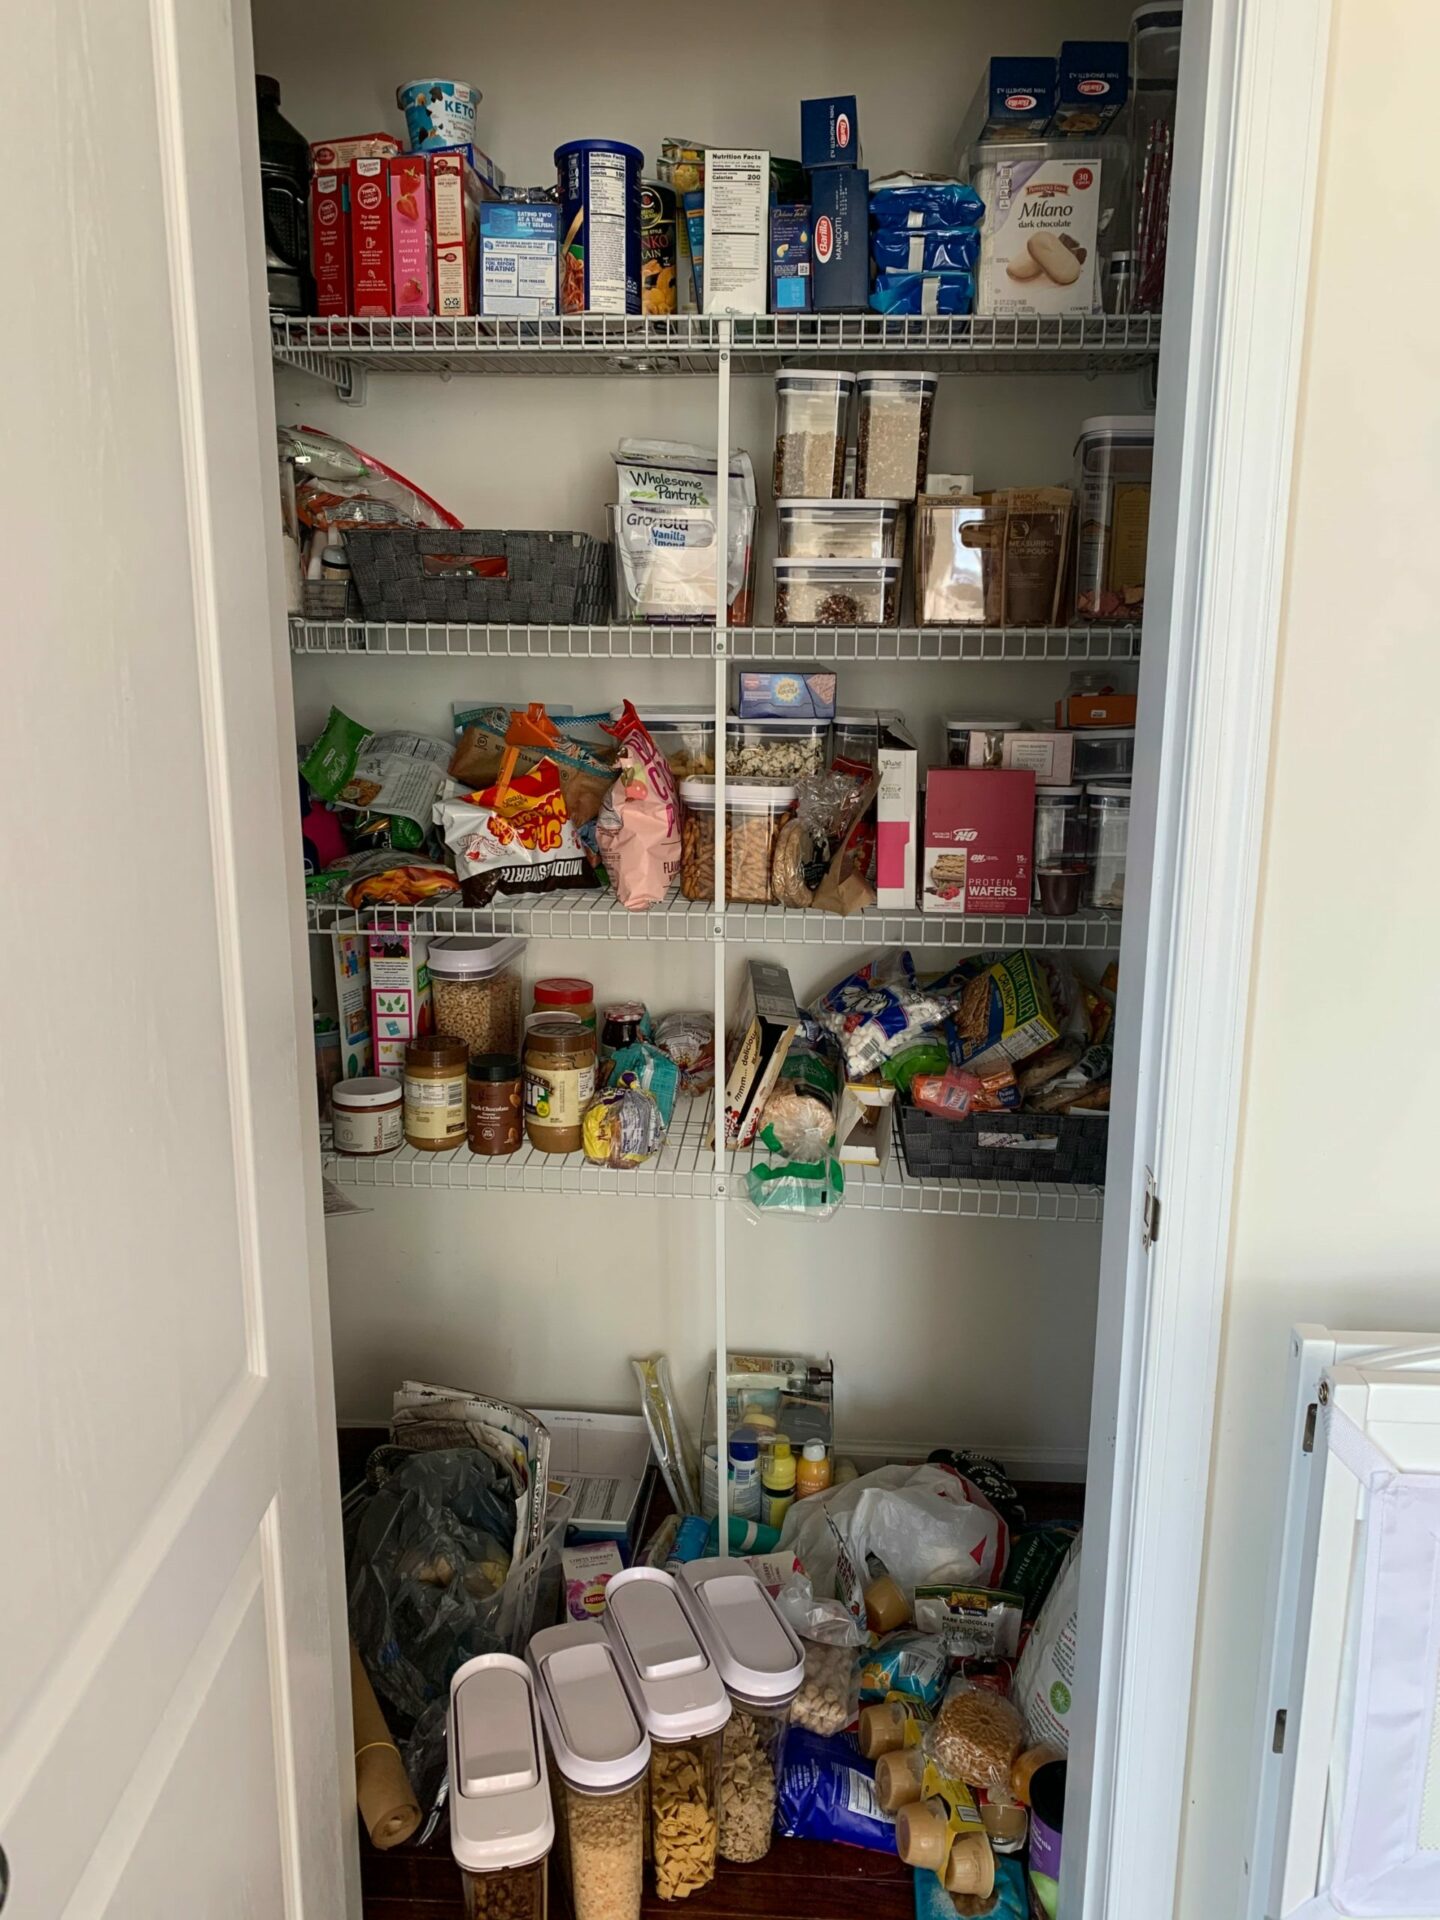 Pantry Organization System - THE BEFORE